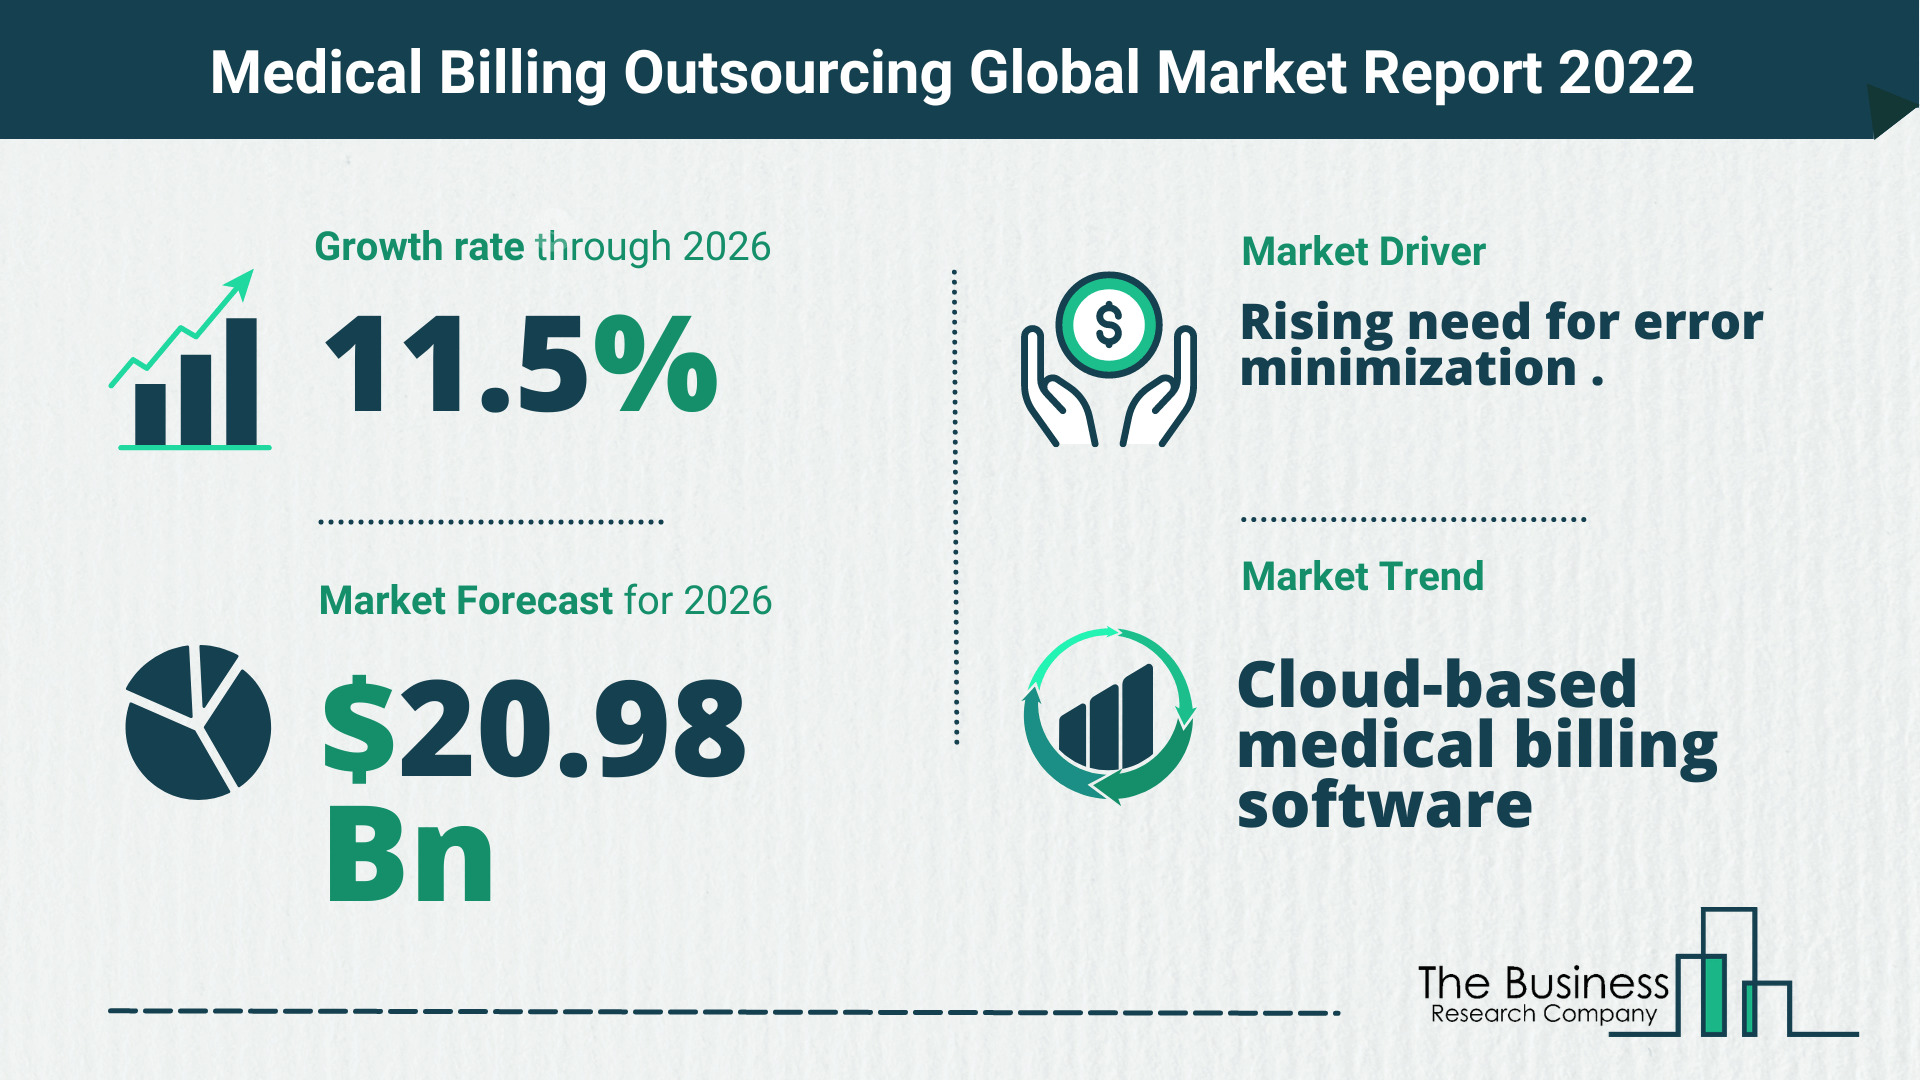 The Medical Billing Outsourcing Market Share, Market Size, And Growth Rate 2022